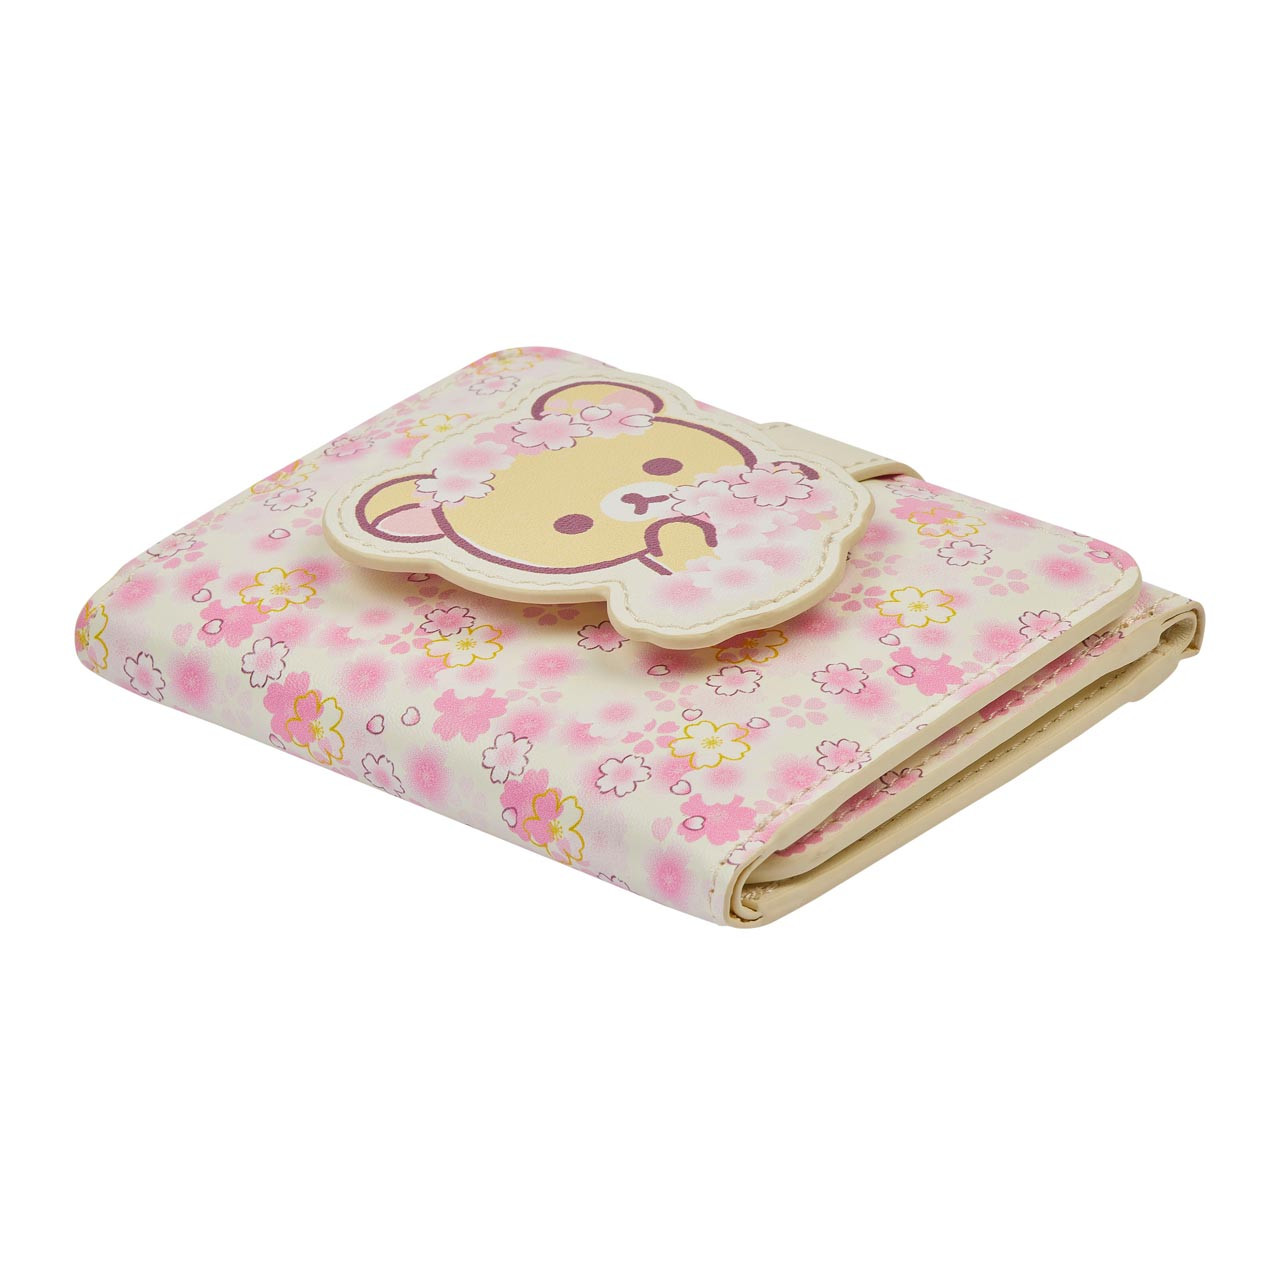 Spring Cherry Blossom Women's Fabric Wallet 